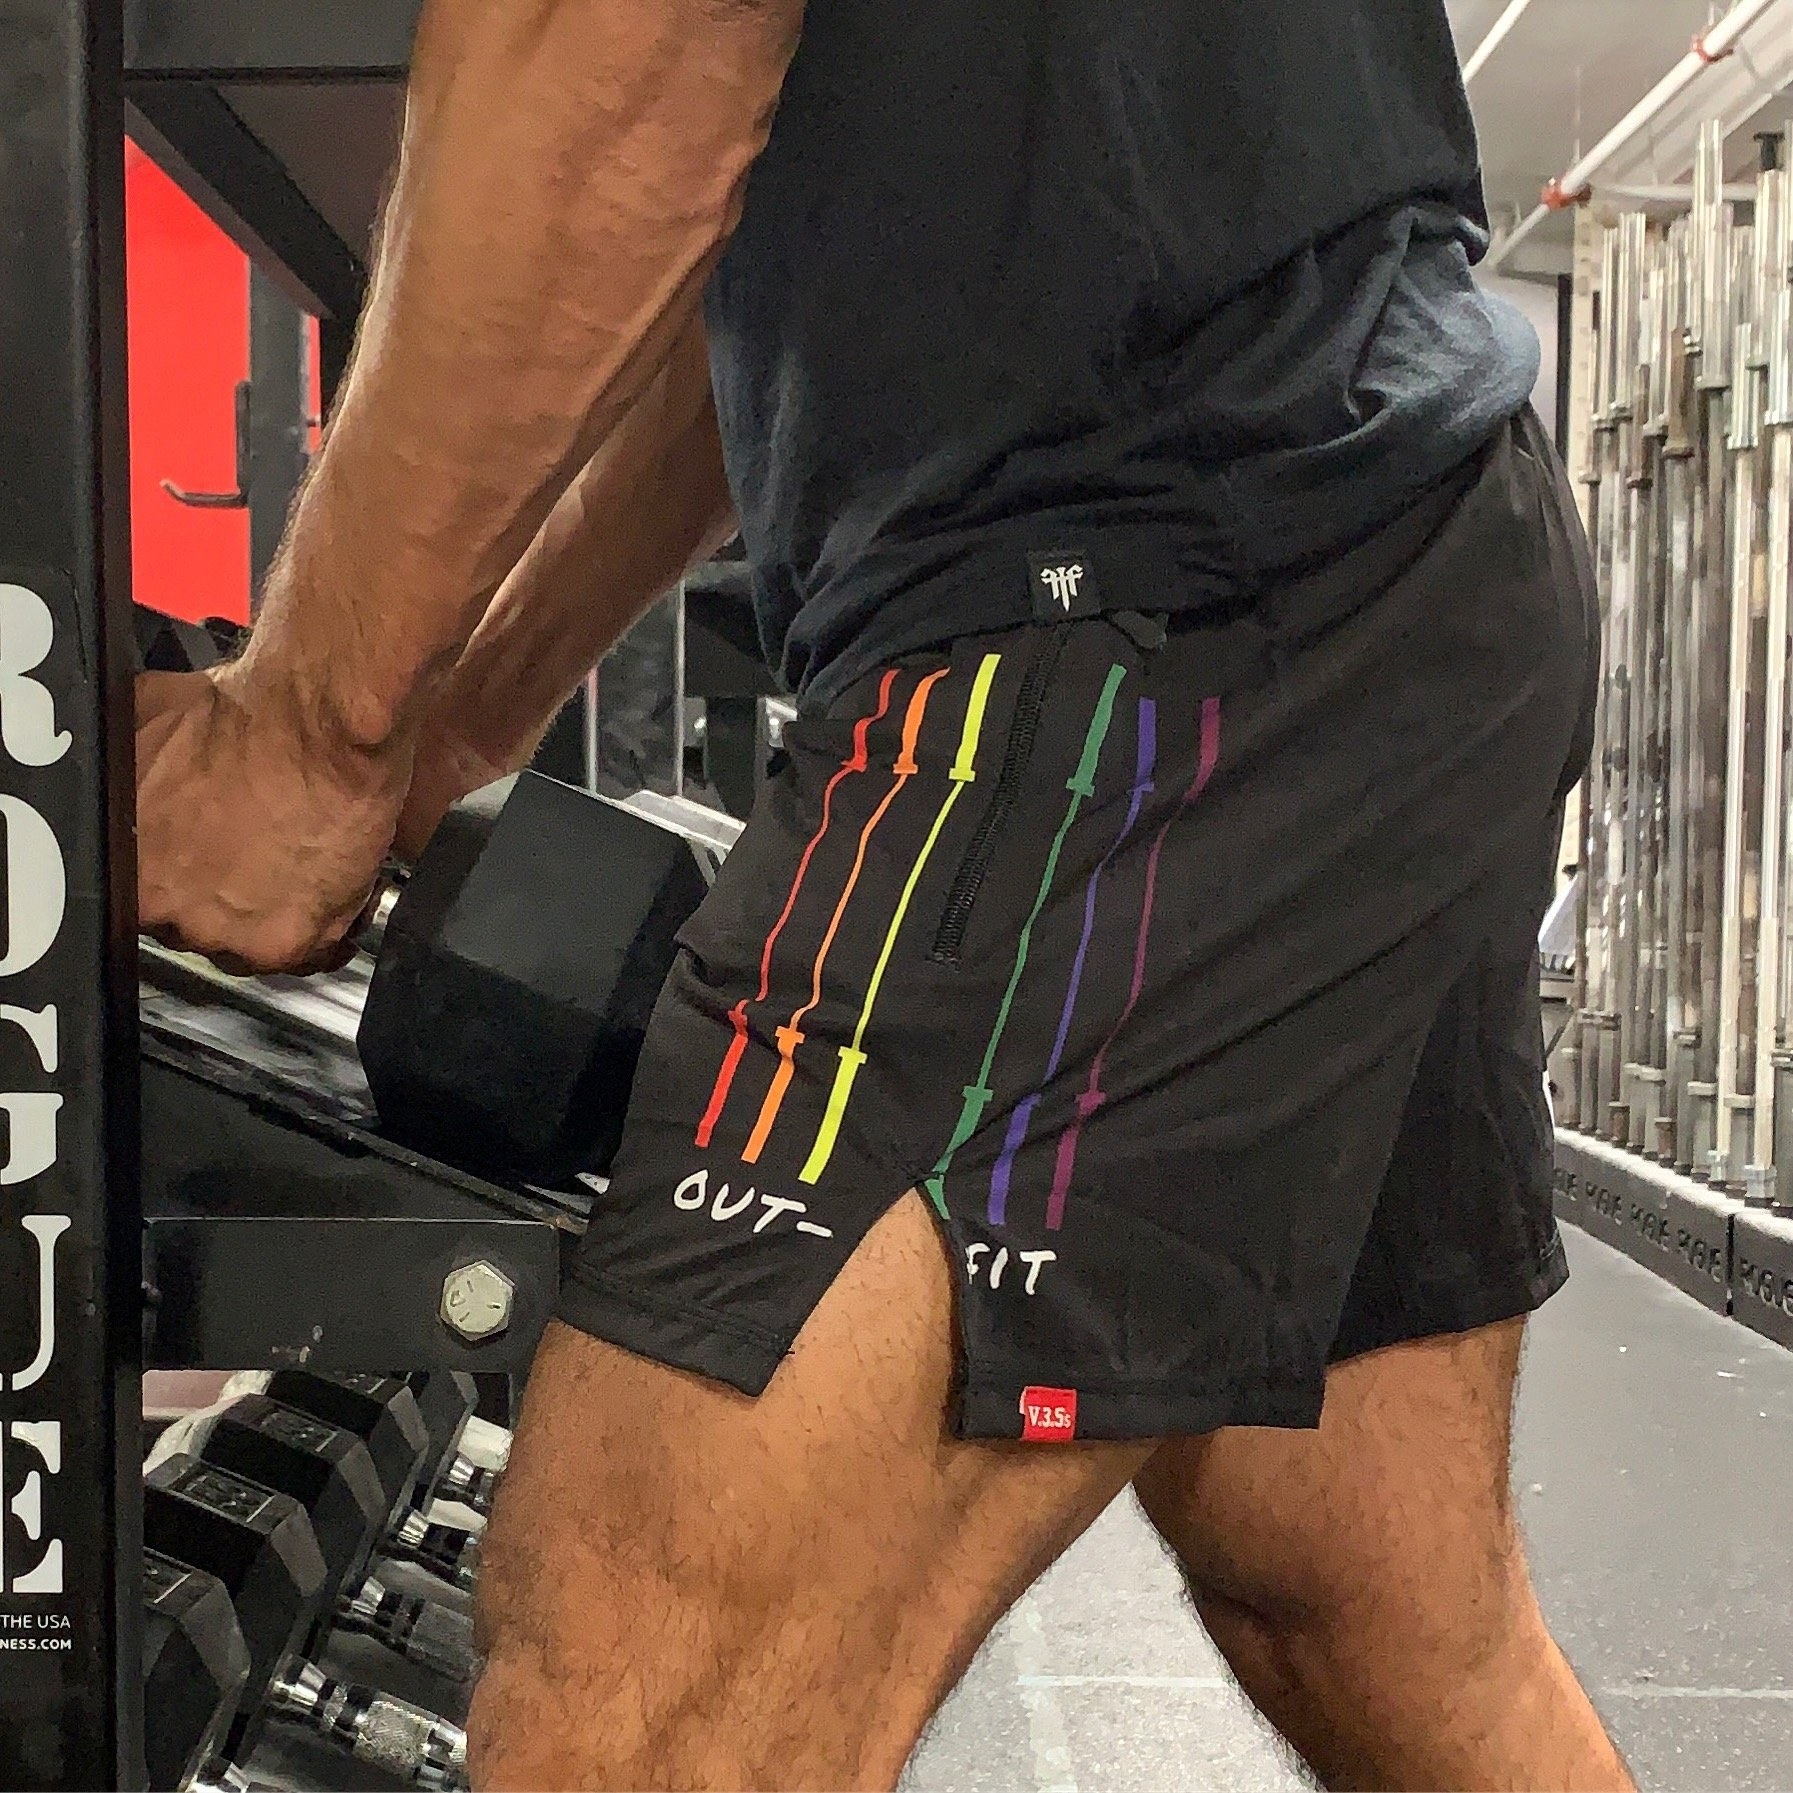 a model wearing the shorts with a rainbow logo on the bottom next to barbells